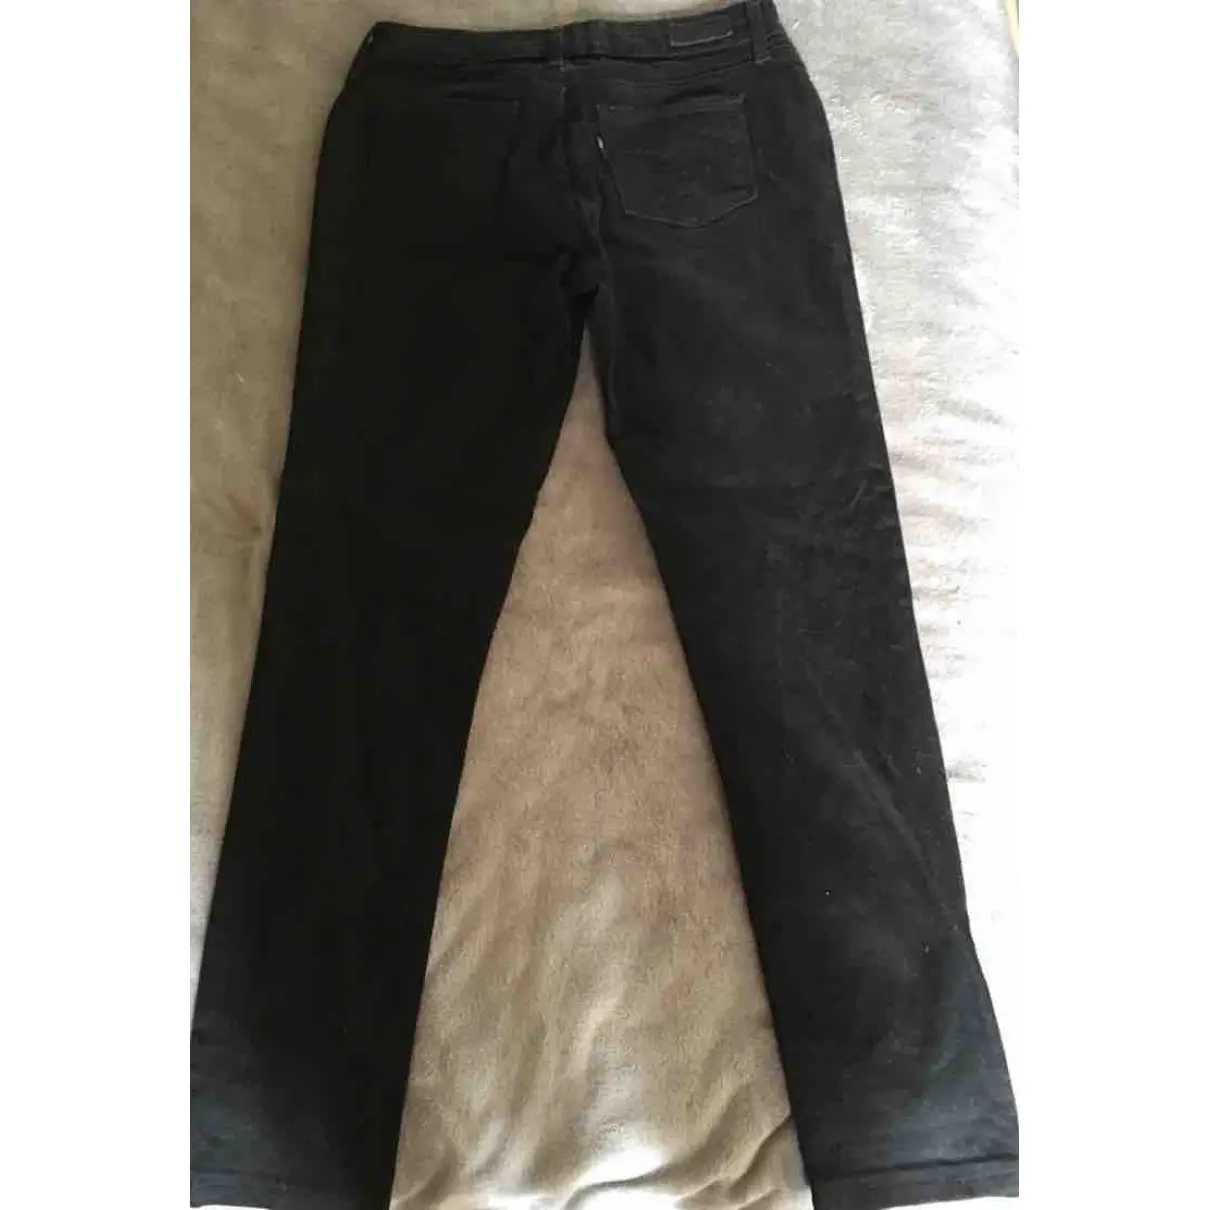 Levi's Straight pants for sale